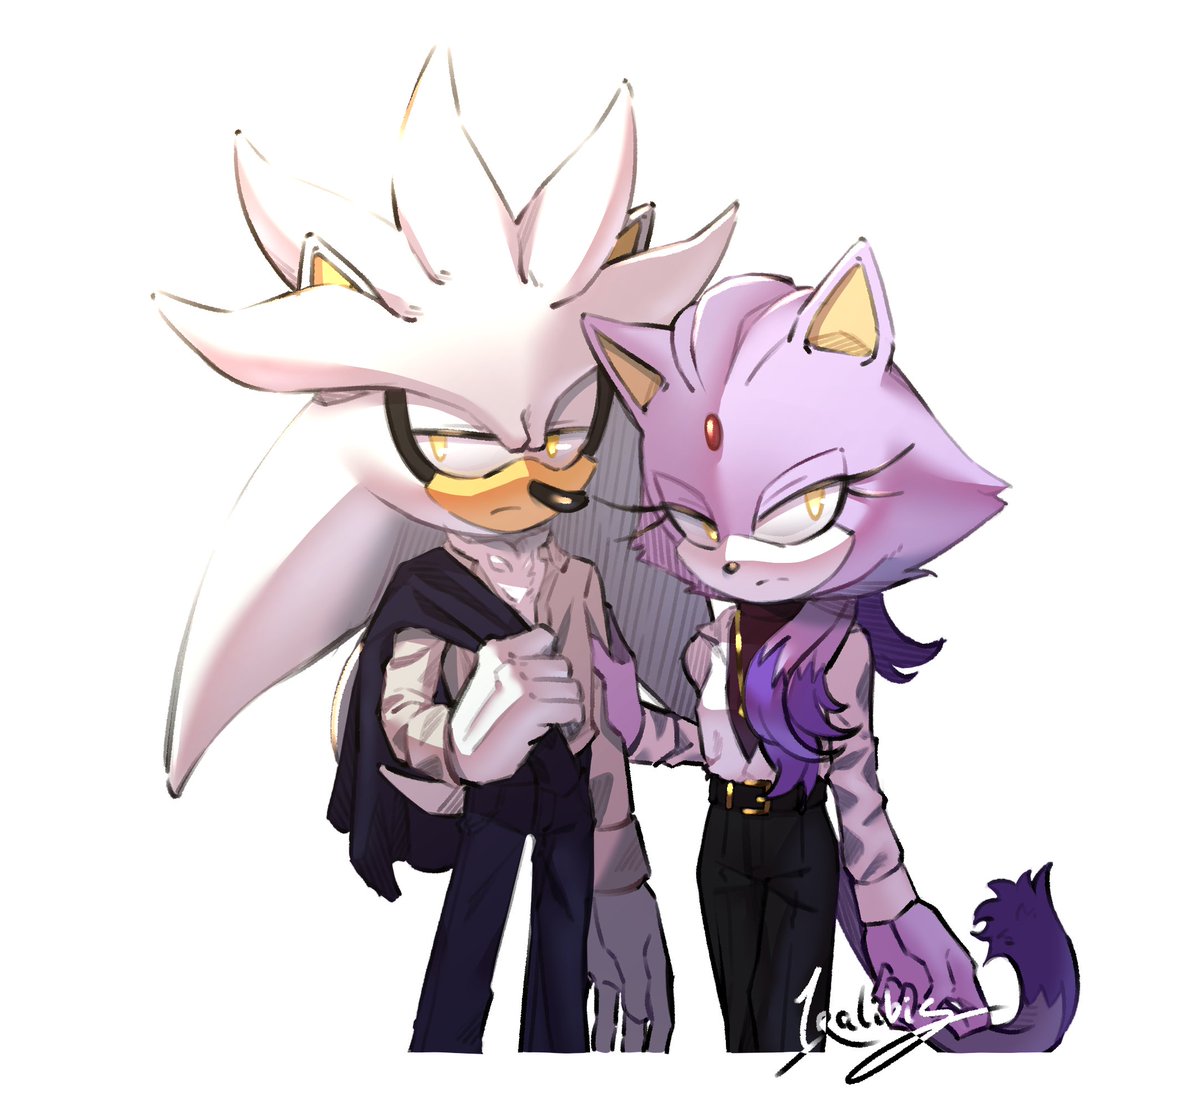 [SCHEDULED MAINTENANCE] > We Are as One >> Silver & Blaze We are as one Our bond cannot be undone Soaring fearless within your eyes We must try #Silvaze #silverthehedgehog #blazethecat #SonicTheHedgehog